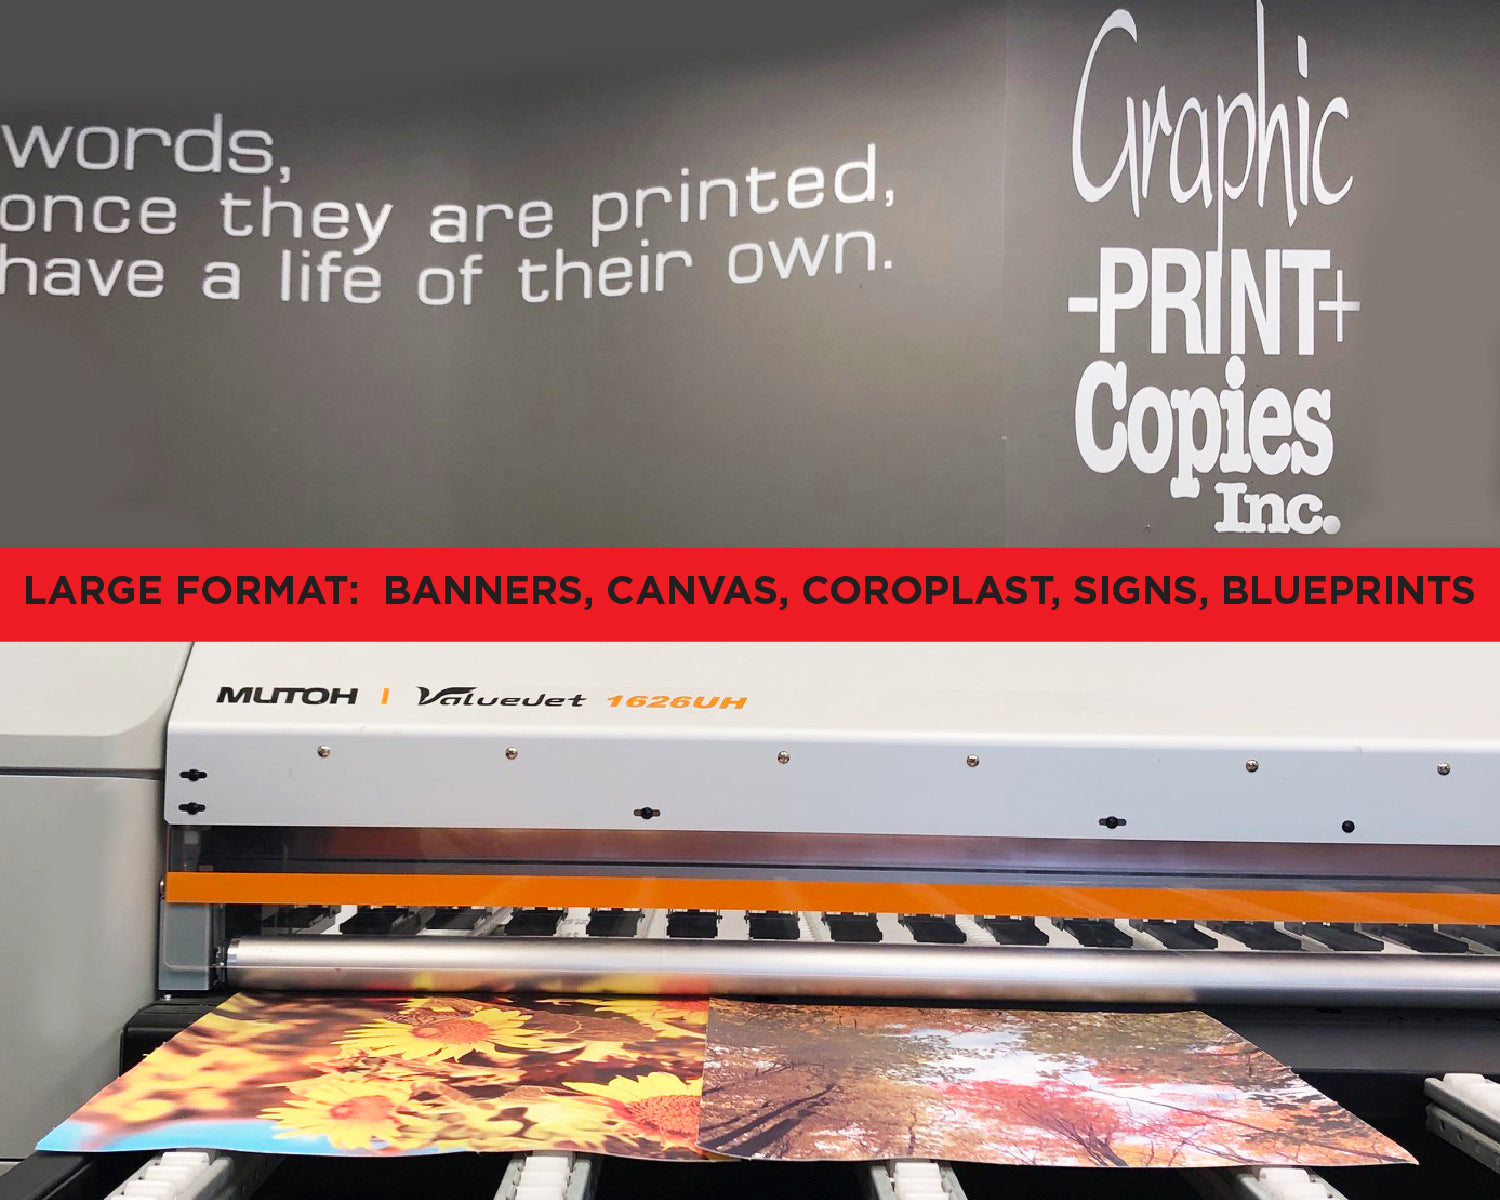 Graphic Print and Copies Inc